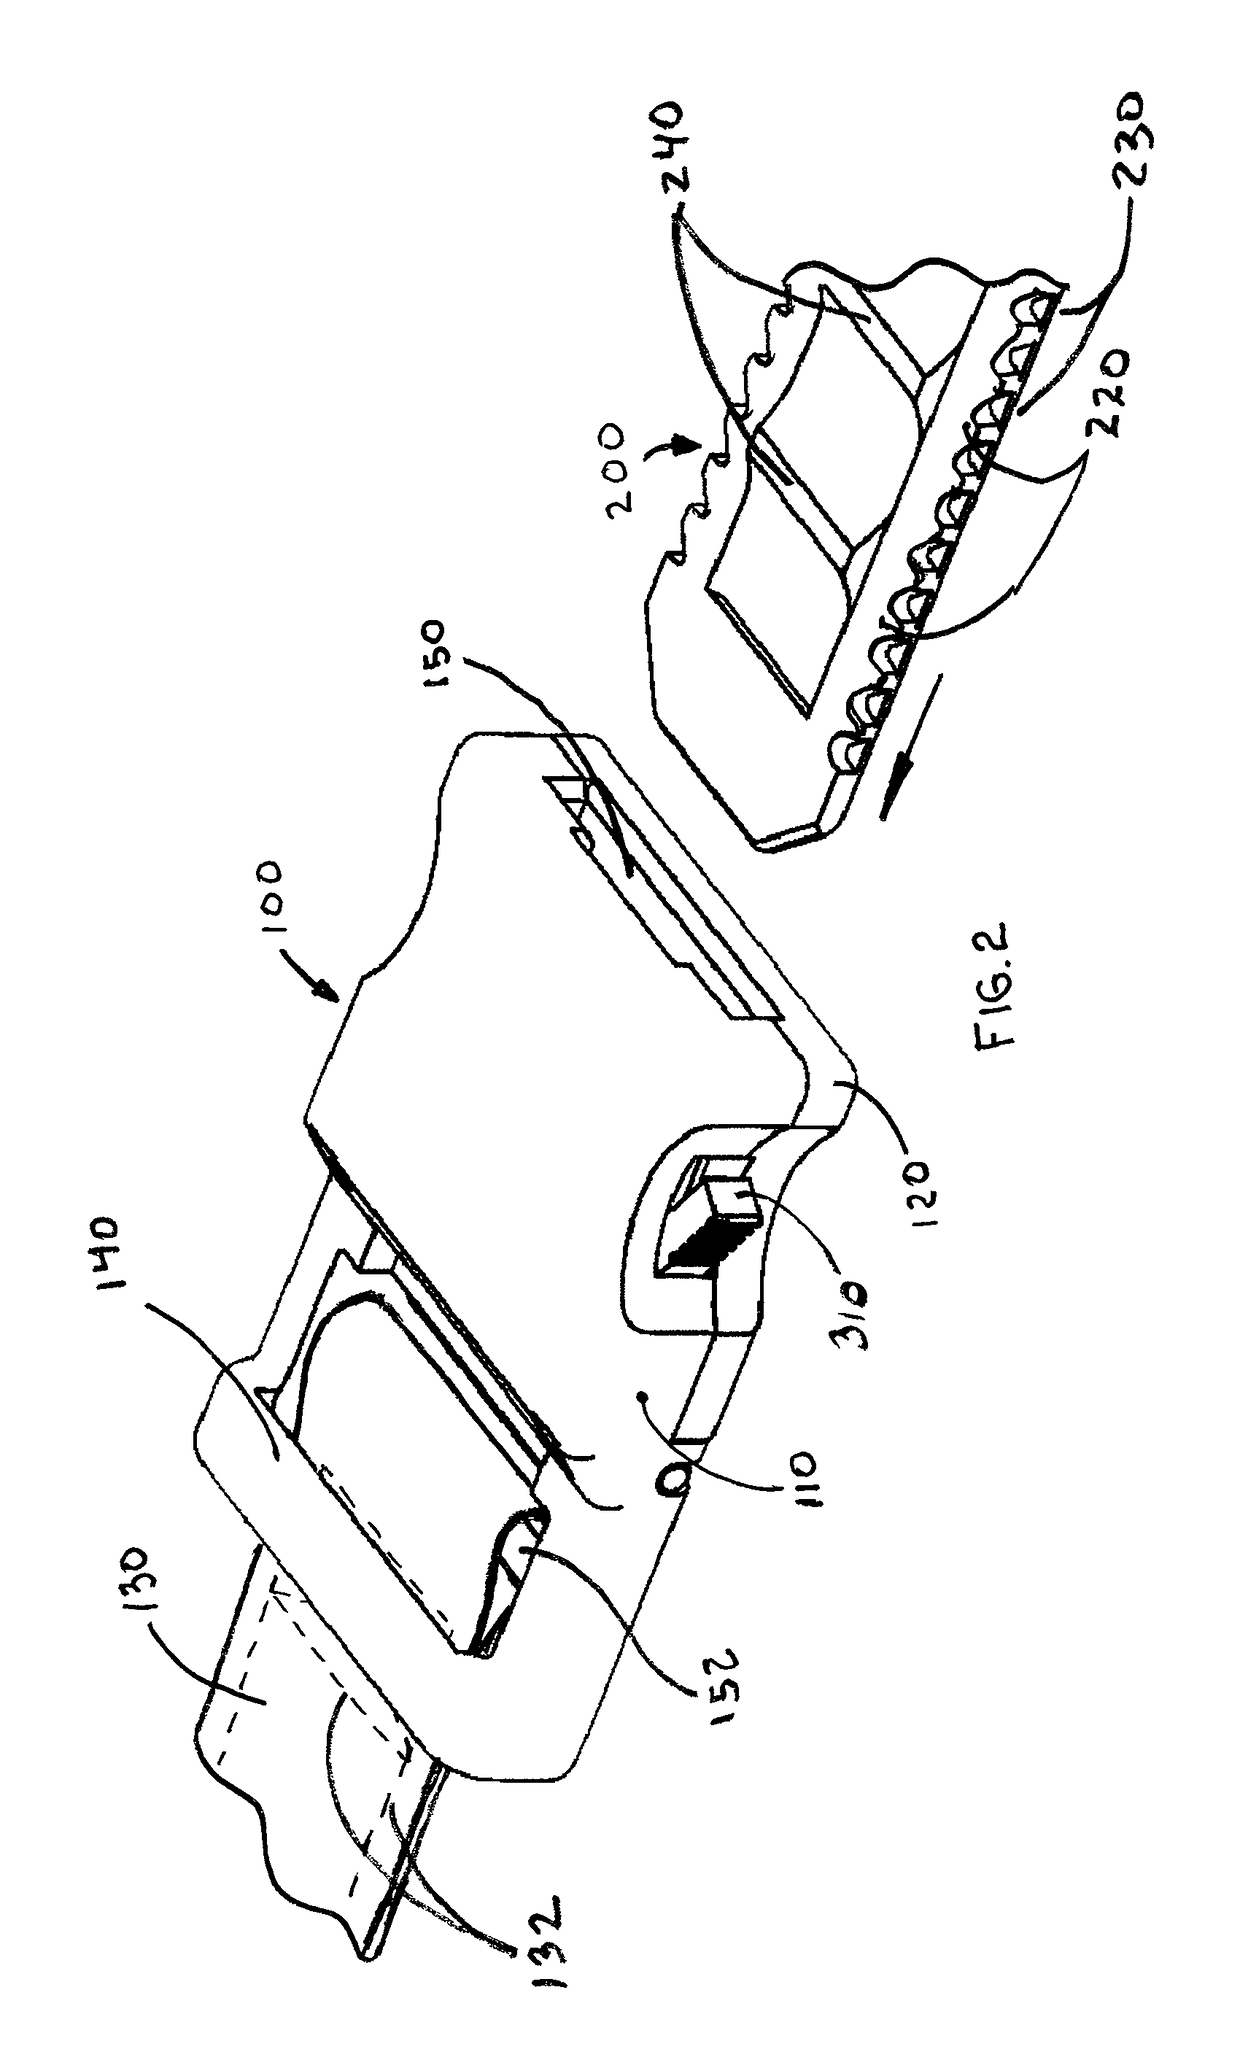 Side release buckle fastener with semi rigid insertion structure